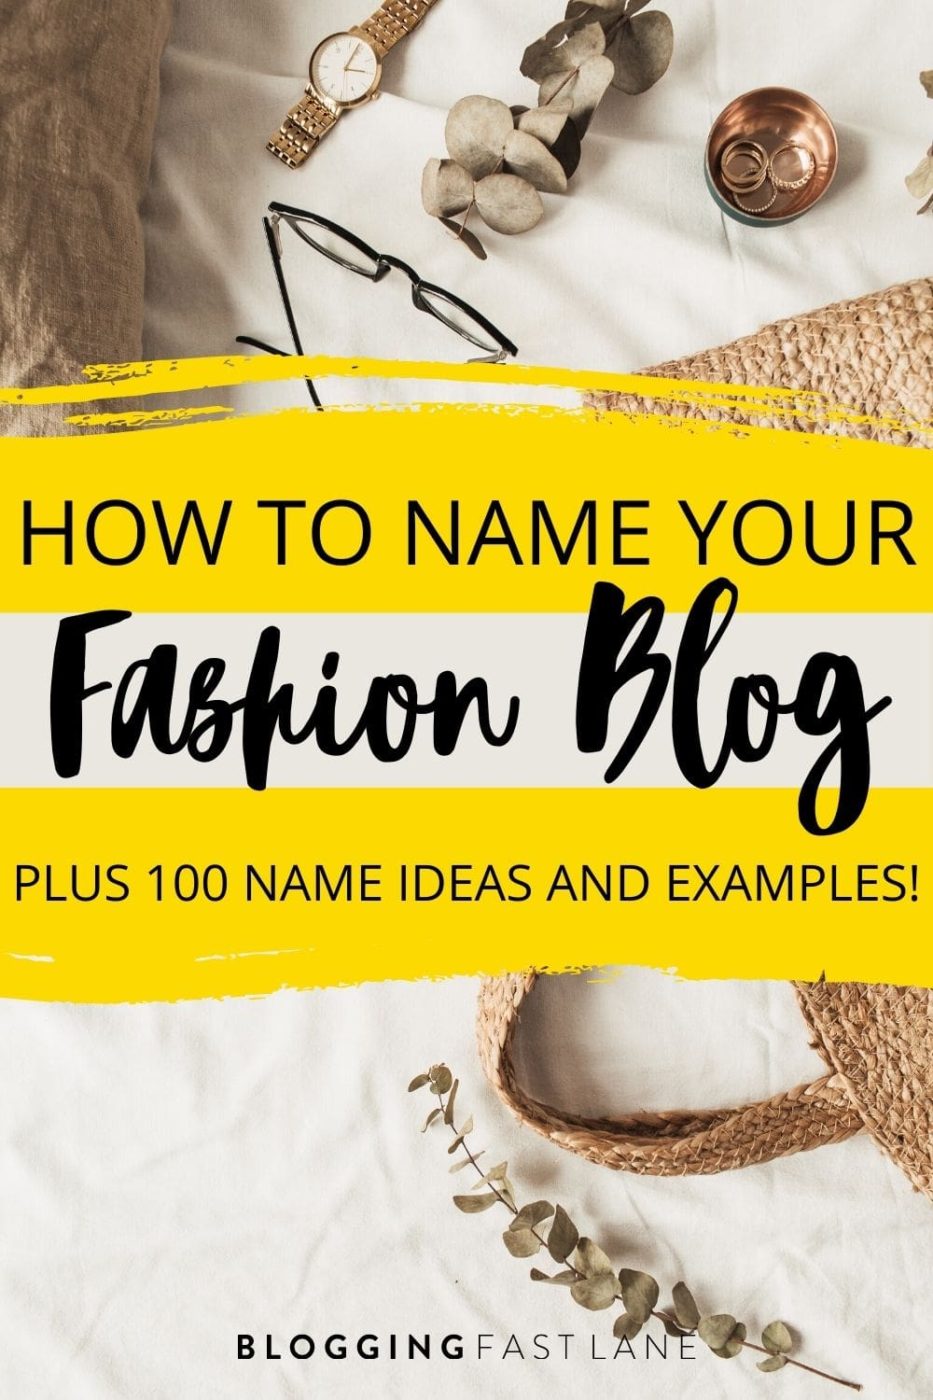 Fashion Blog Names | Searching for a catchy fashion blog name? Click here to see our tips for naming your fashion blog, plus 100 name ideas and examples!